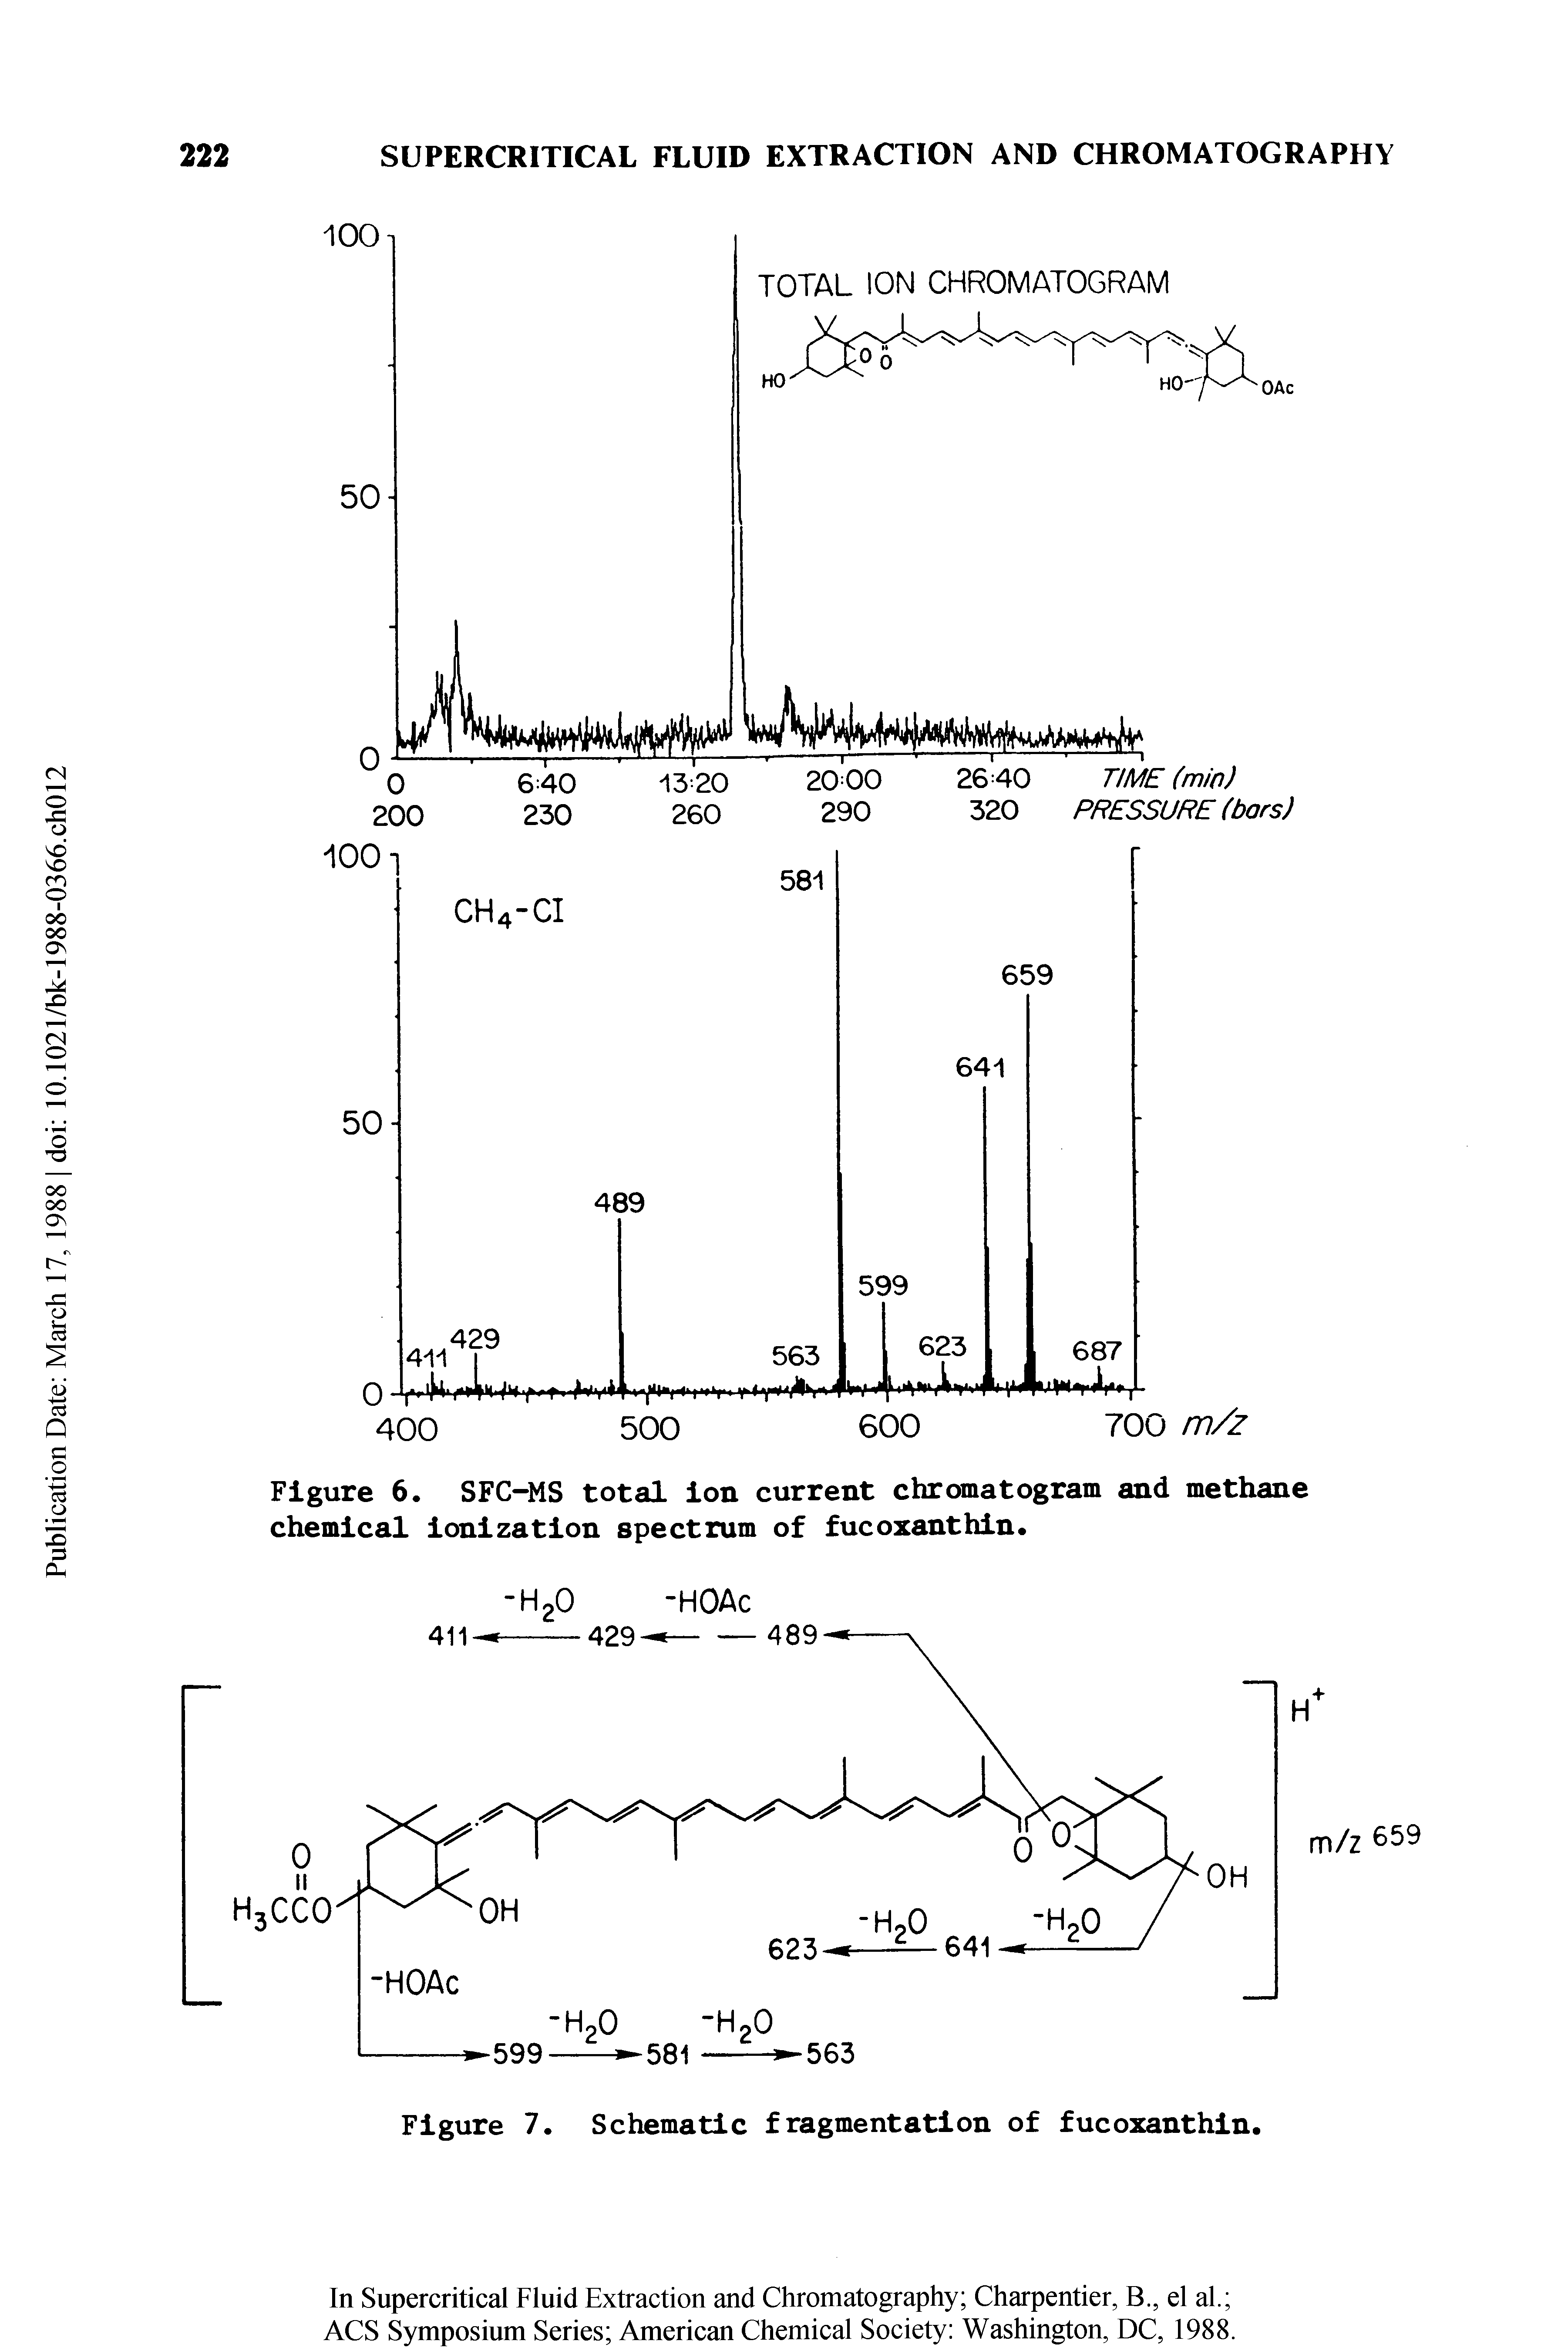 Figure 6. SFC-MS total ion current chromatogram and methane chemical ionization spectrum of fucoxanthin.